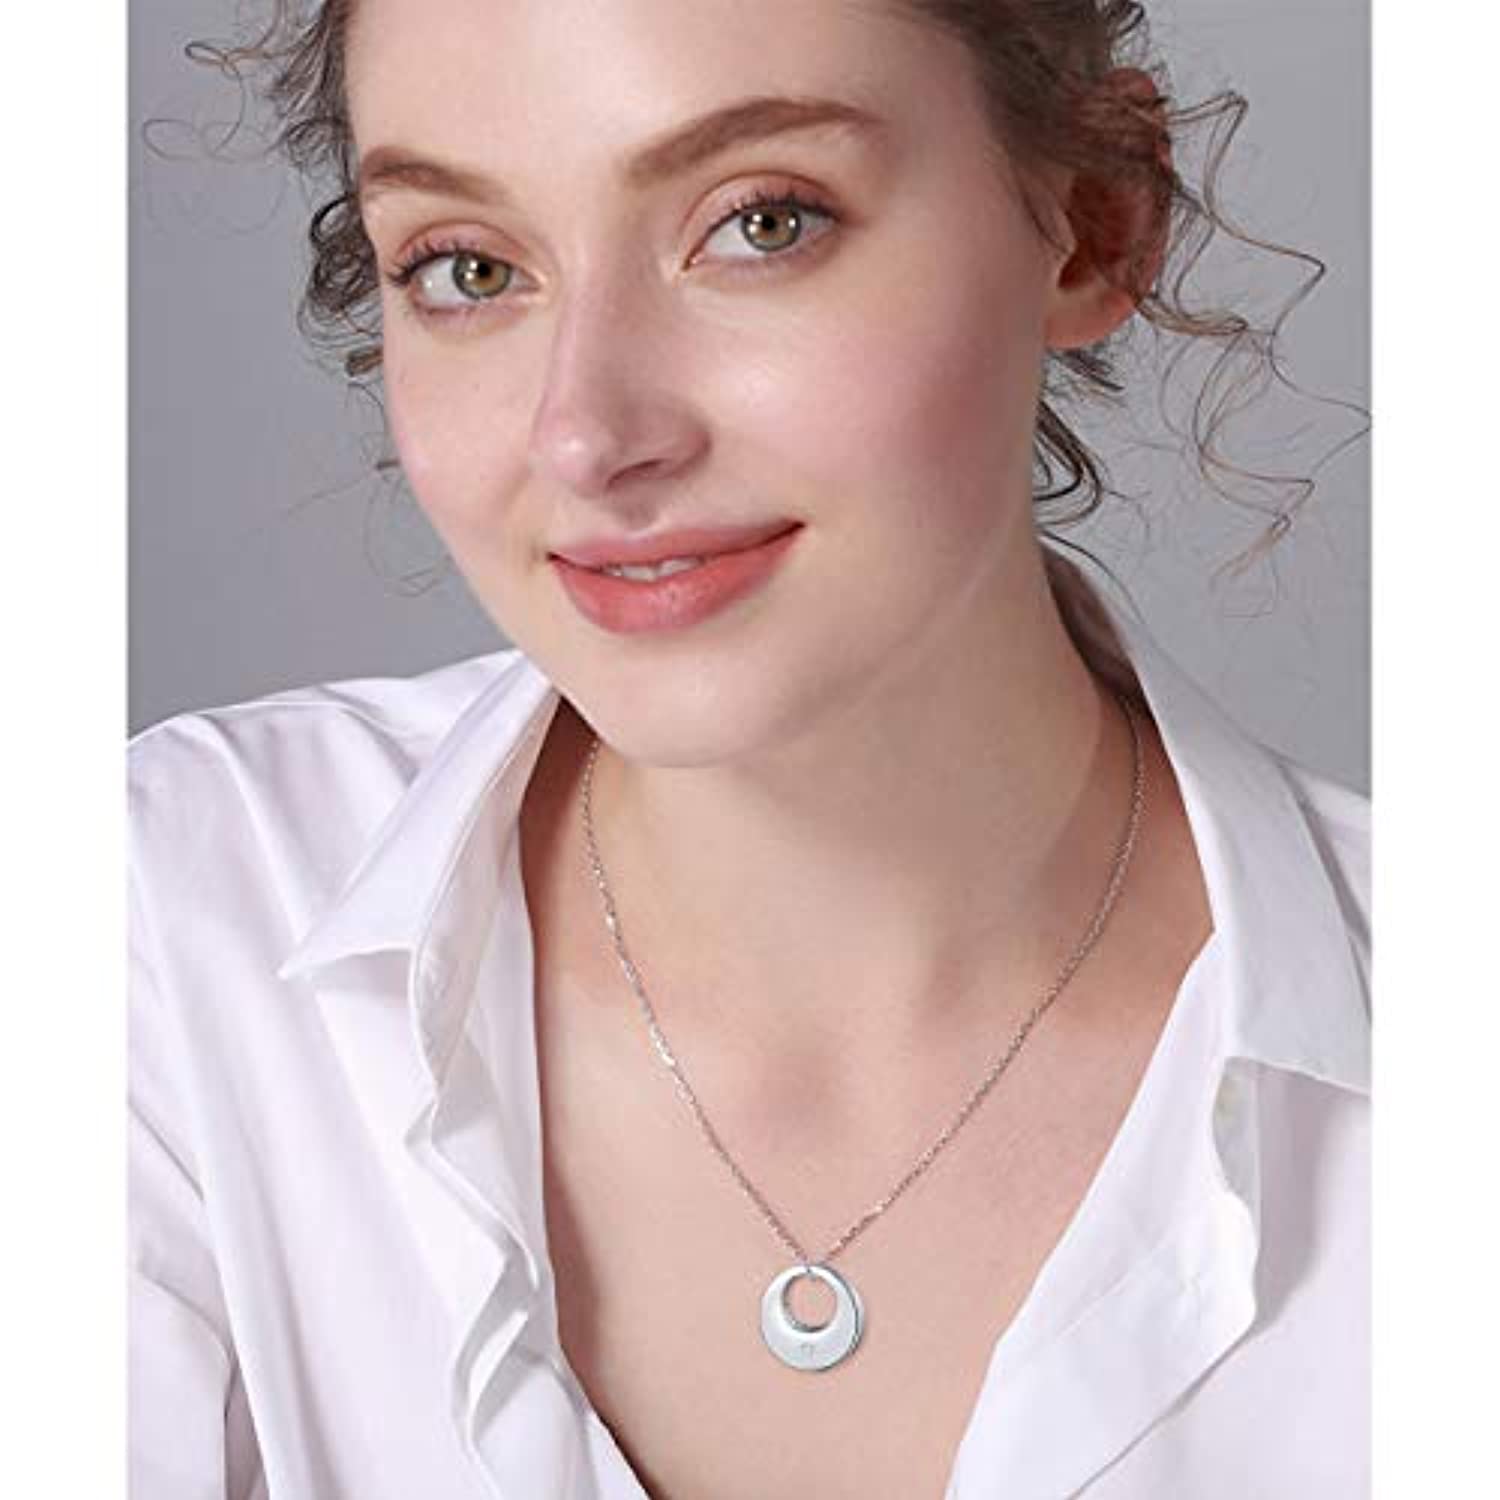 Urn Necklace & Cremation Jewelry for Ashes of Loved Ones